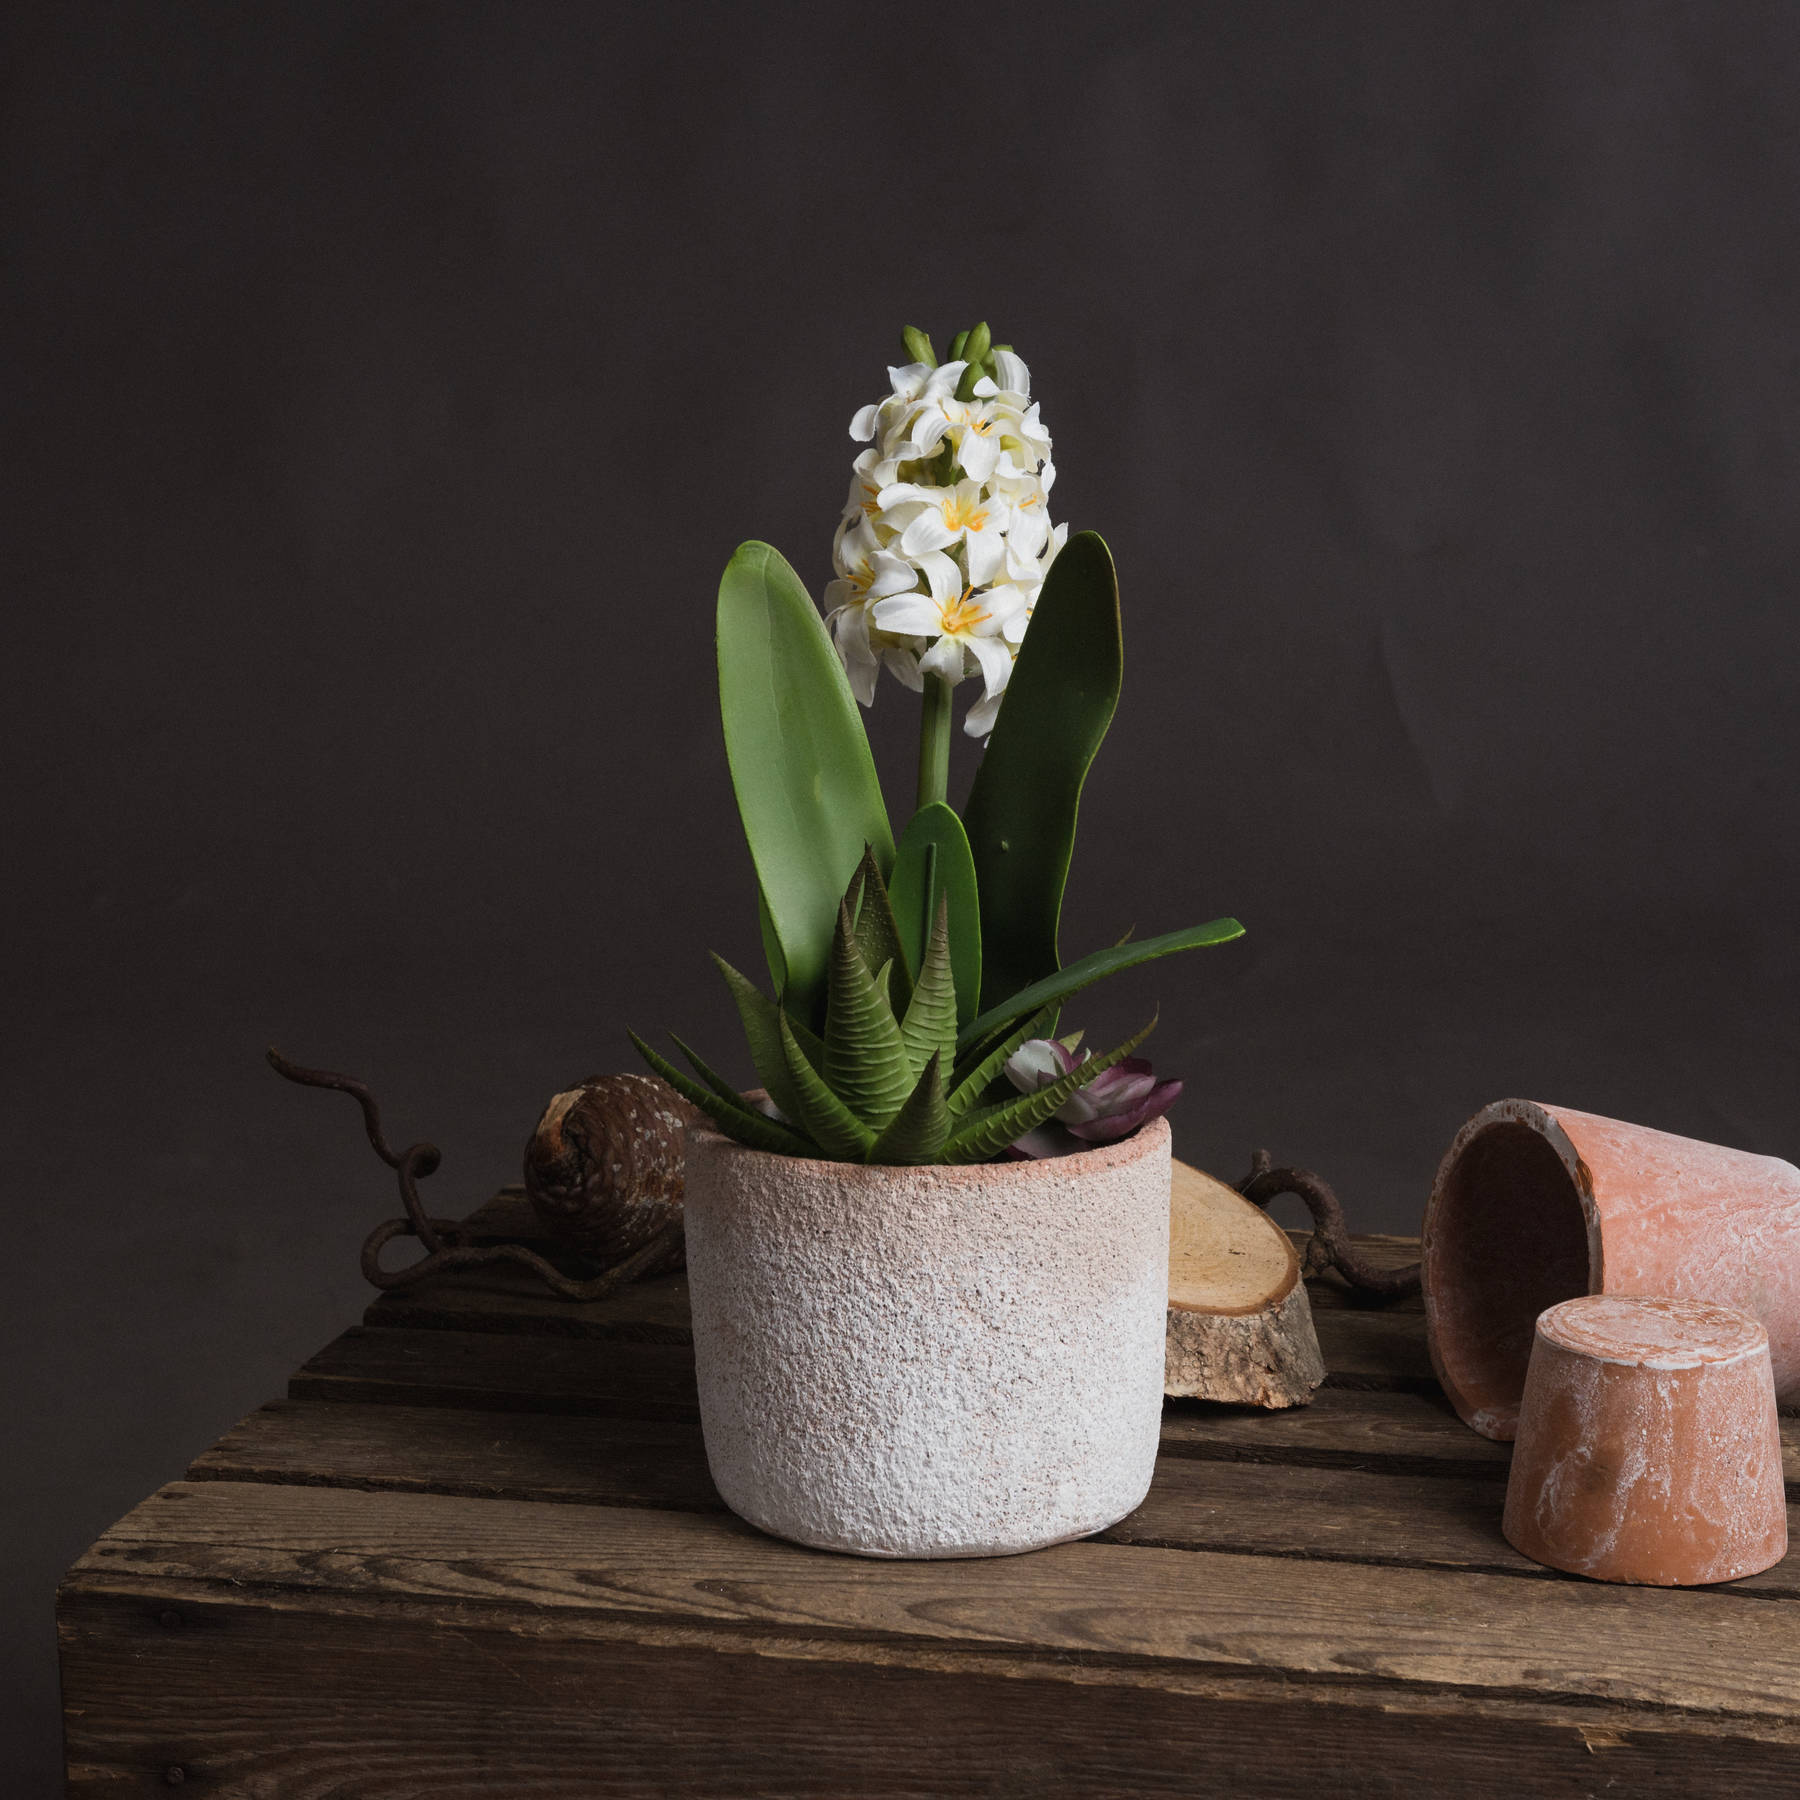 Potted White Hyacinth - Image 1